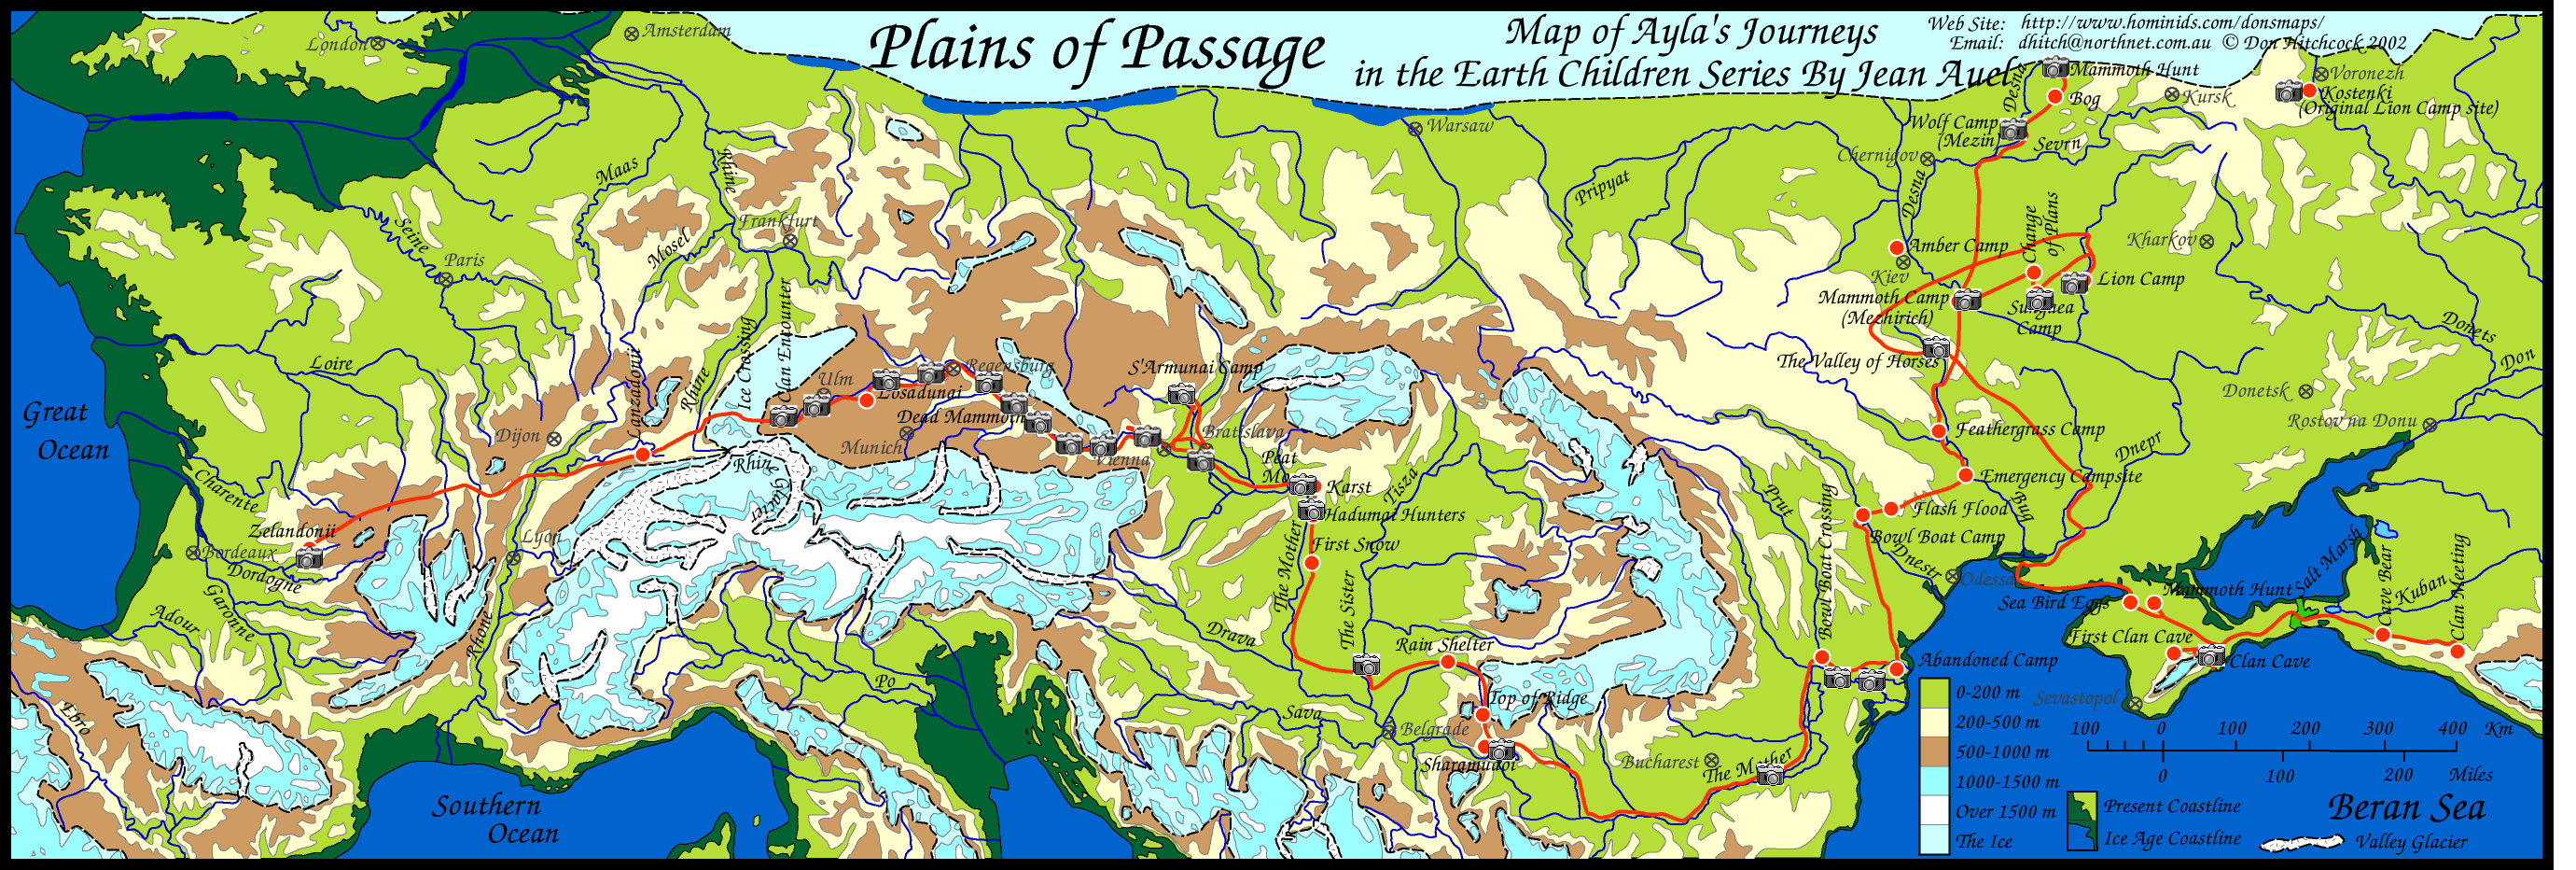 the plains of passage book